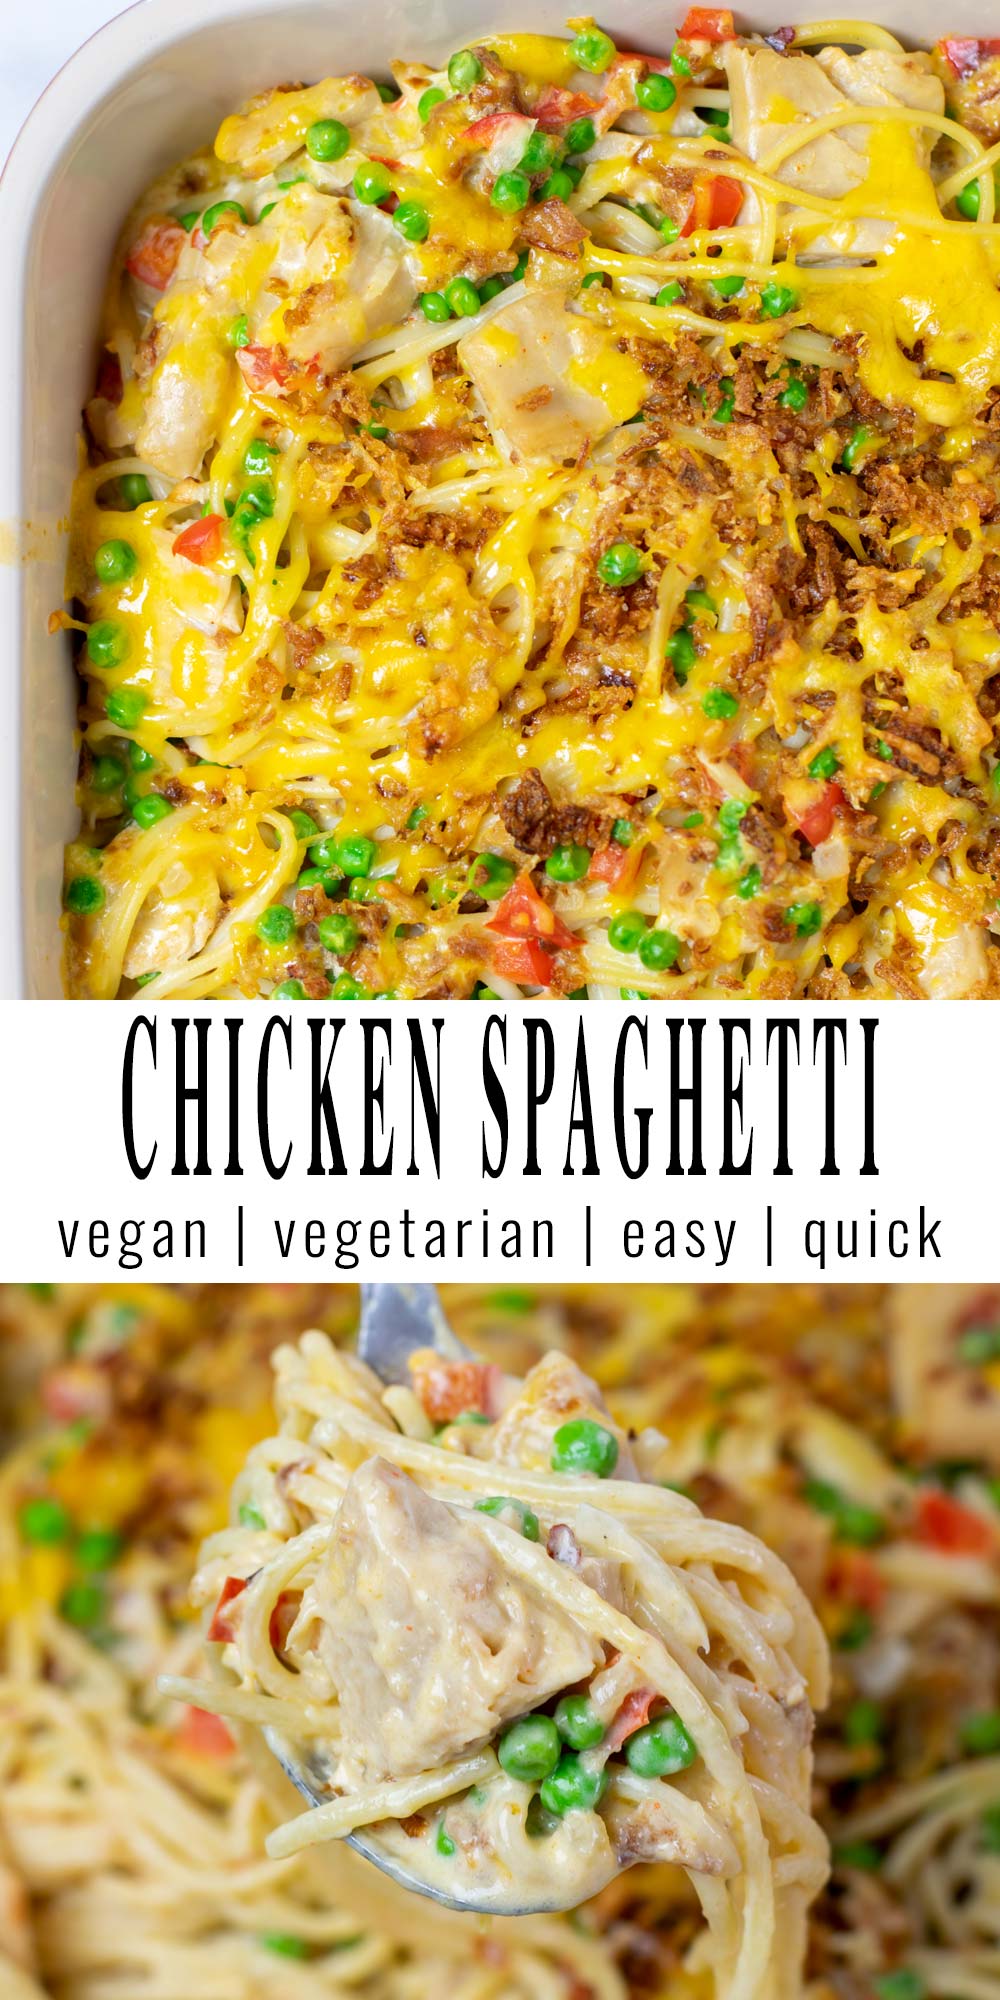 Collage of two pictures of the Chicken Spaghetti with recipe title text.